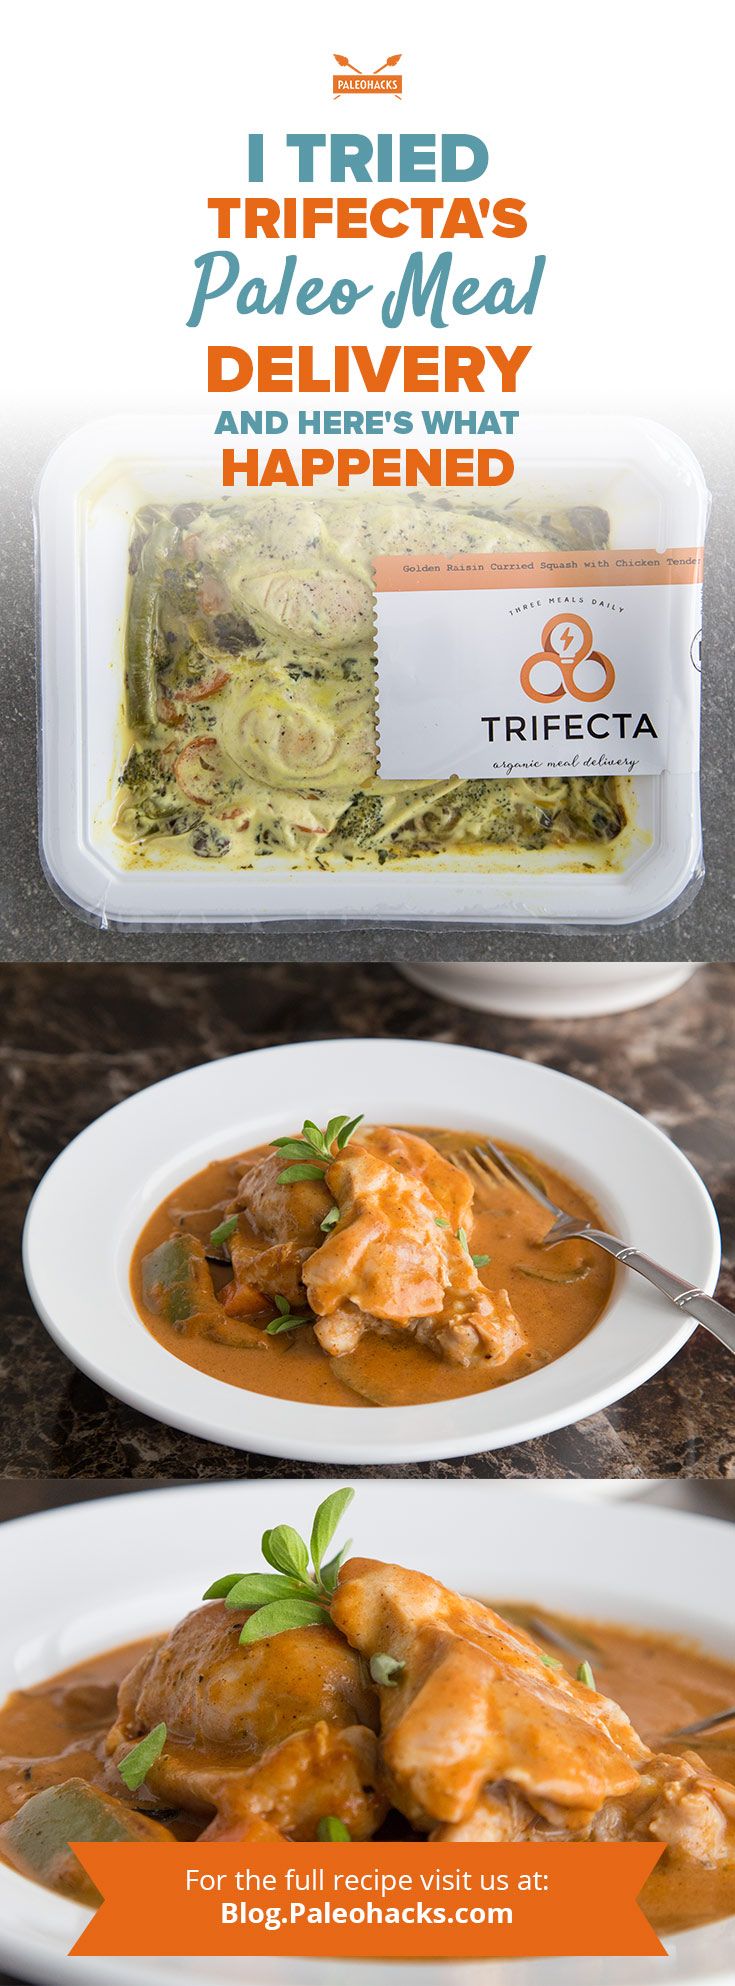 Trifecta is one of the only services we know to deliver fresh, customizable, already prepared and organic foods right to your doorstep. And as a bonus, they offer Paleo meal plans too!